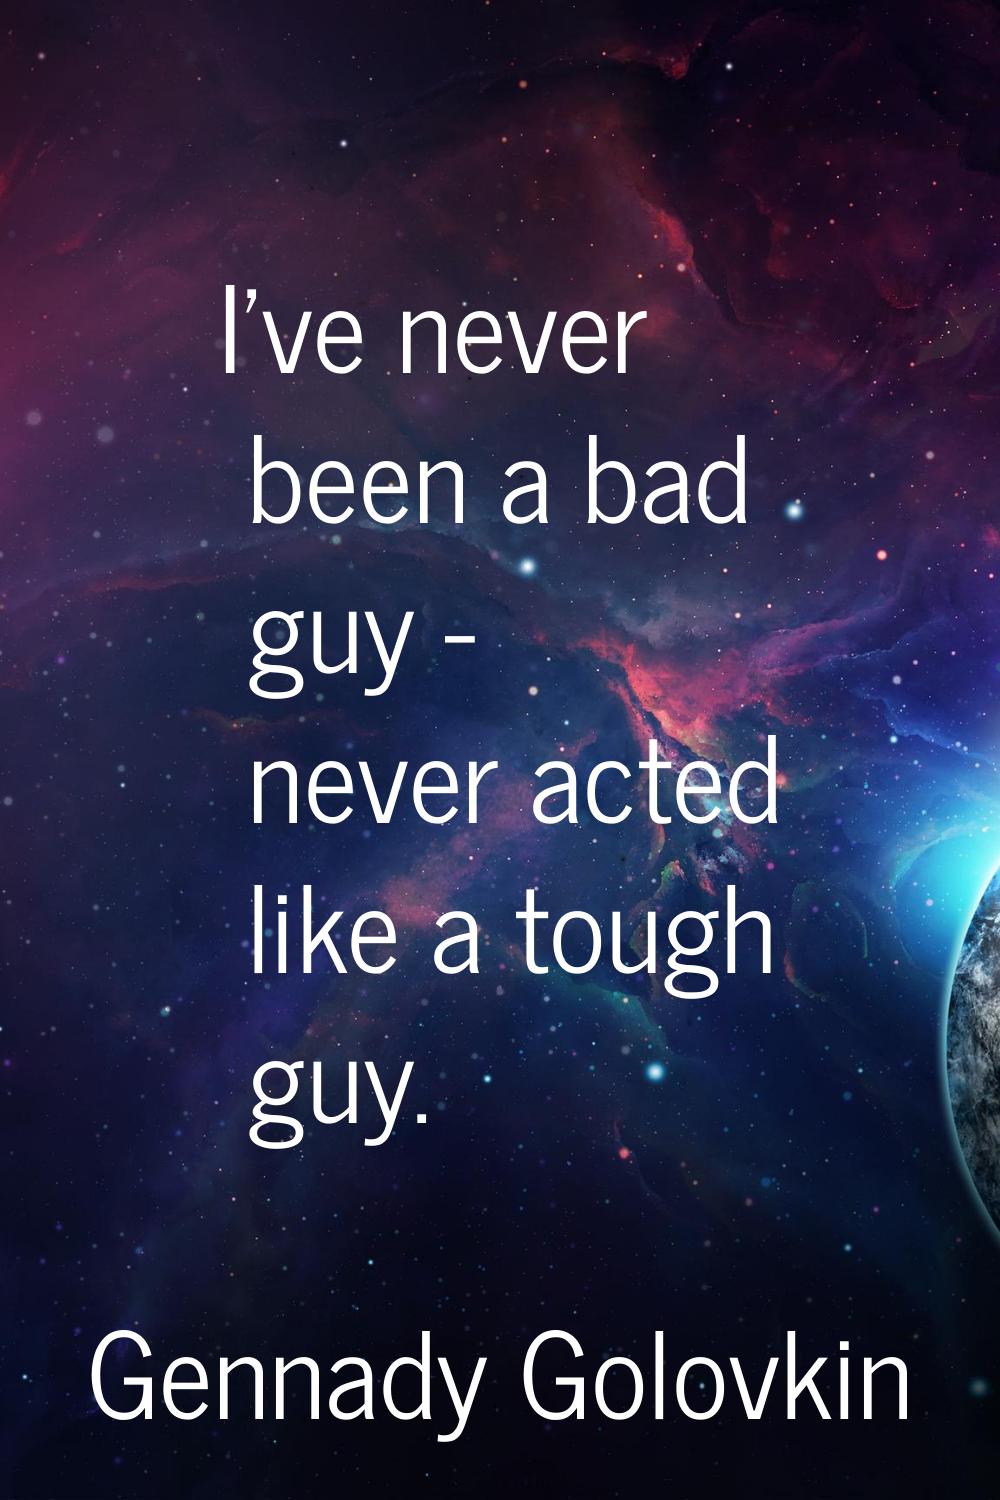 I've never been a bad guy - never acted like a tough guy.